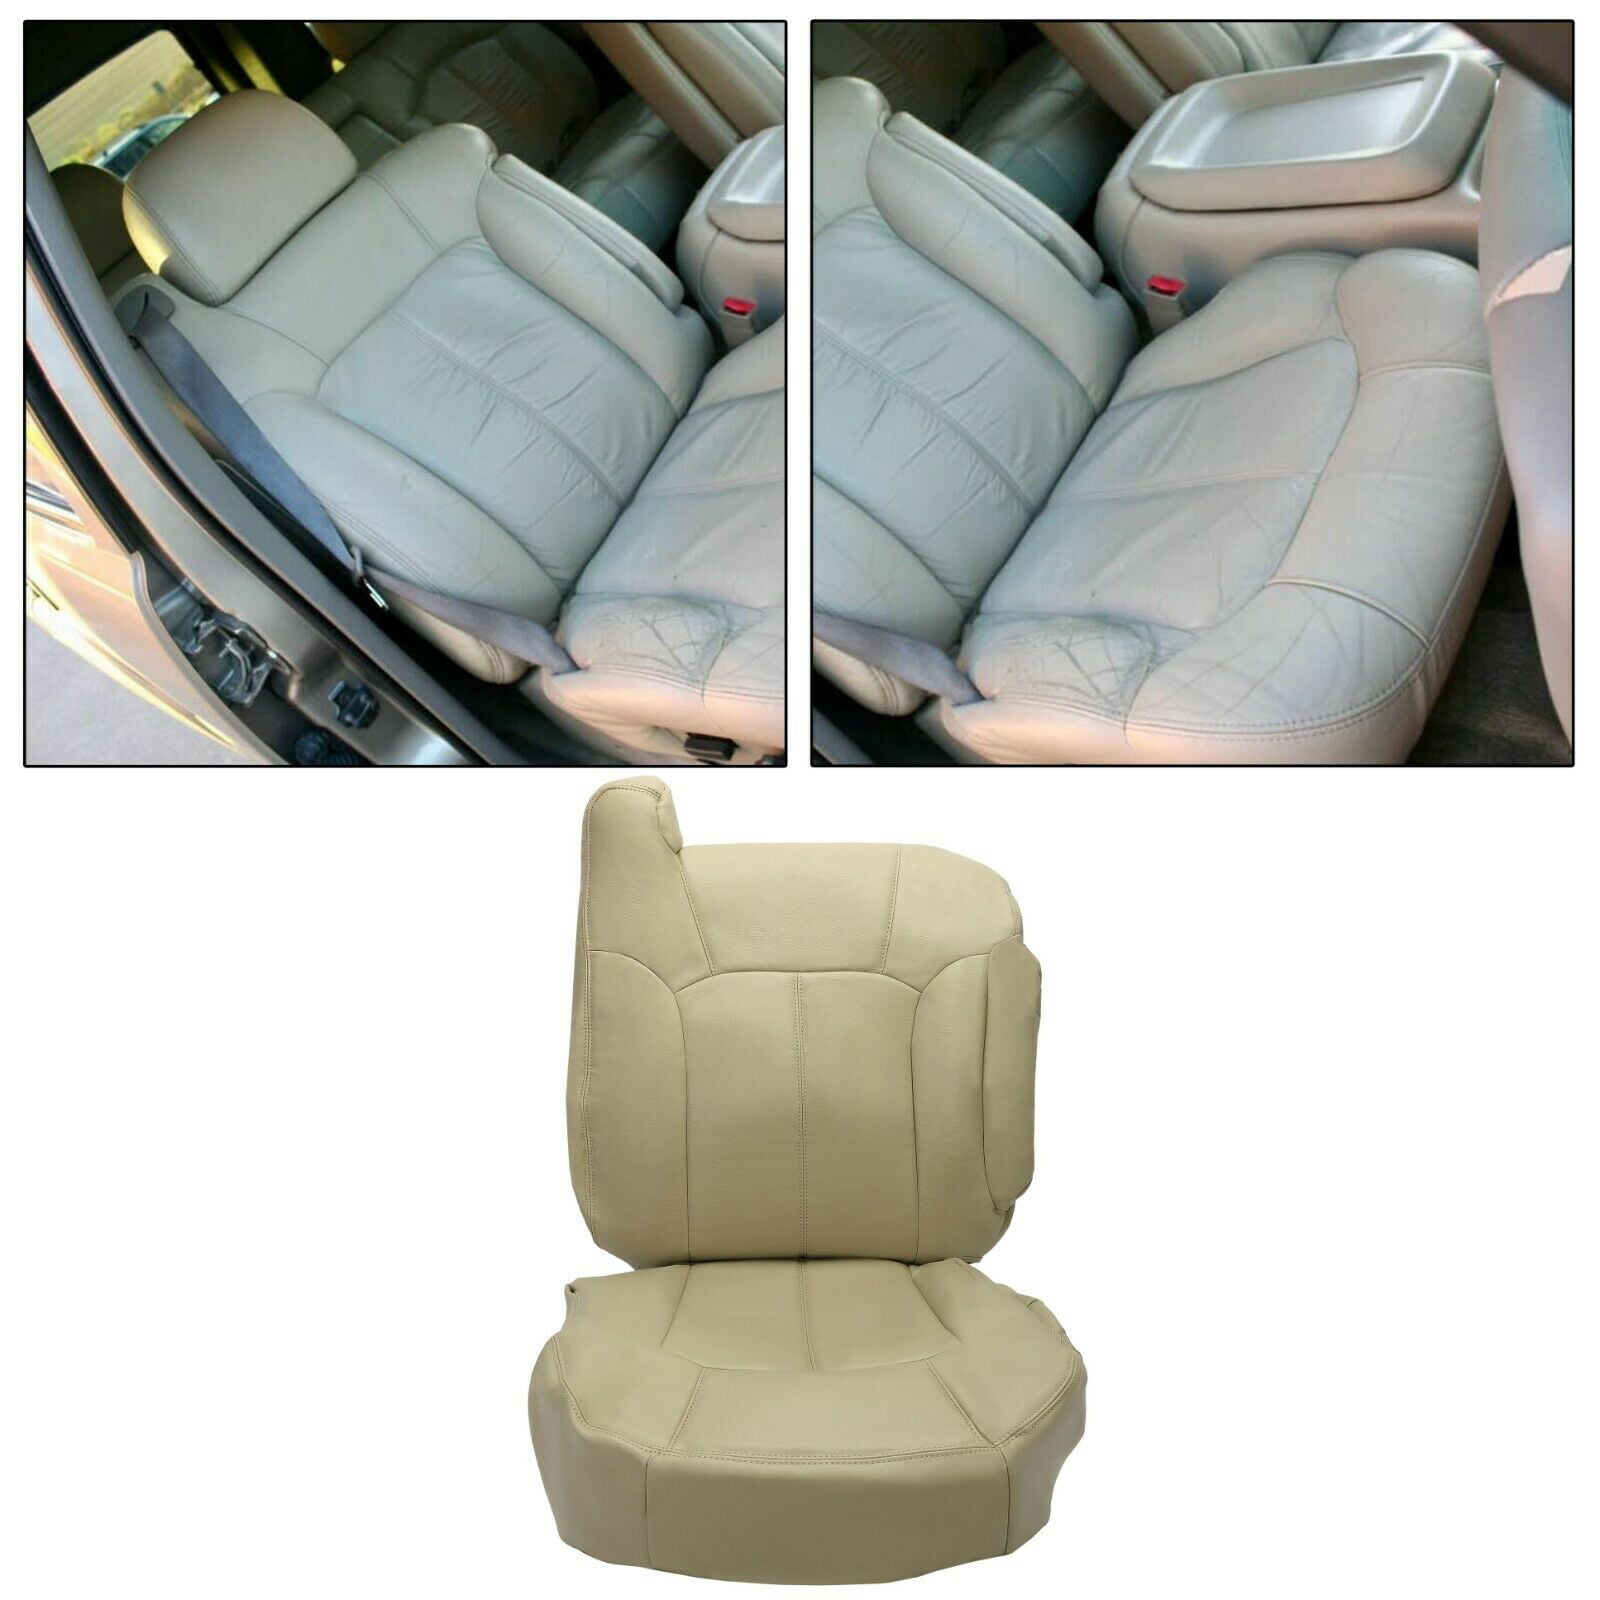 1999-2002 Tahoe Suburban Front Top & Bottom Leather Seat Covers Light Tan 